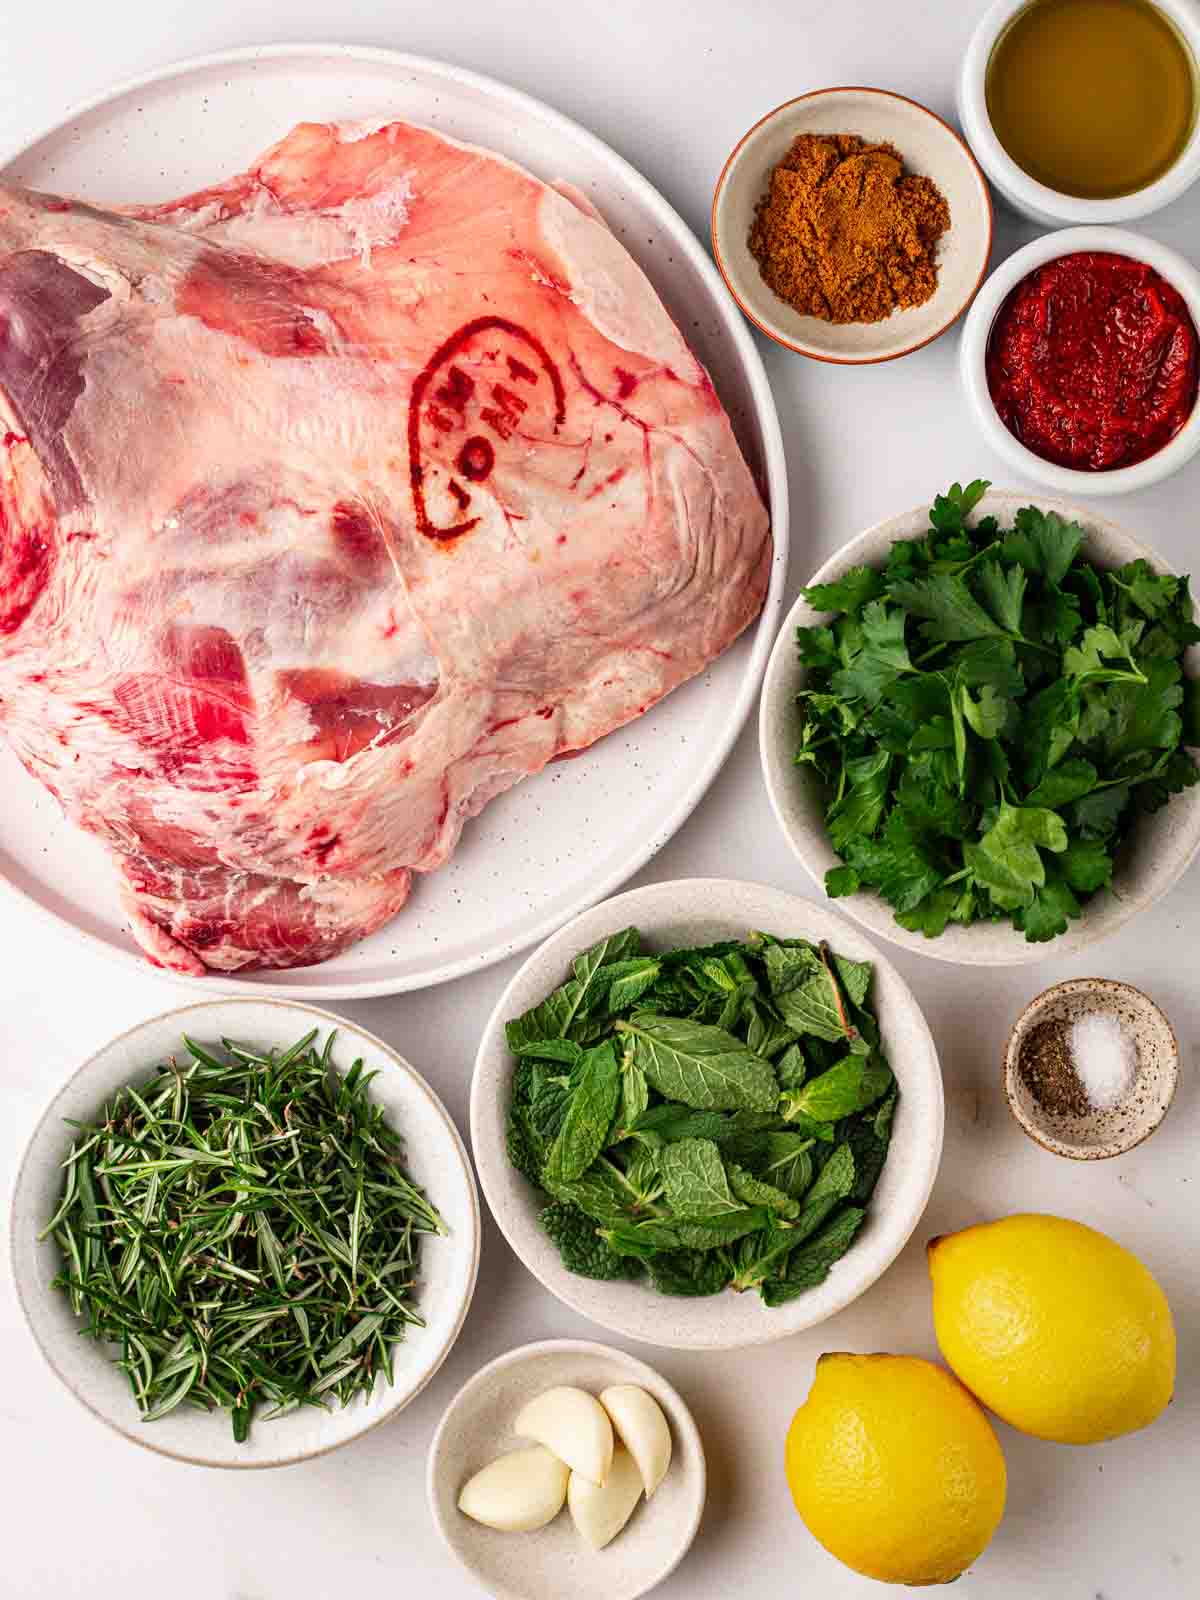 The raw ingredients for making a slow roast shoulder of lamb on a table.